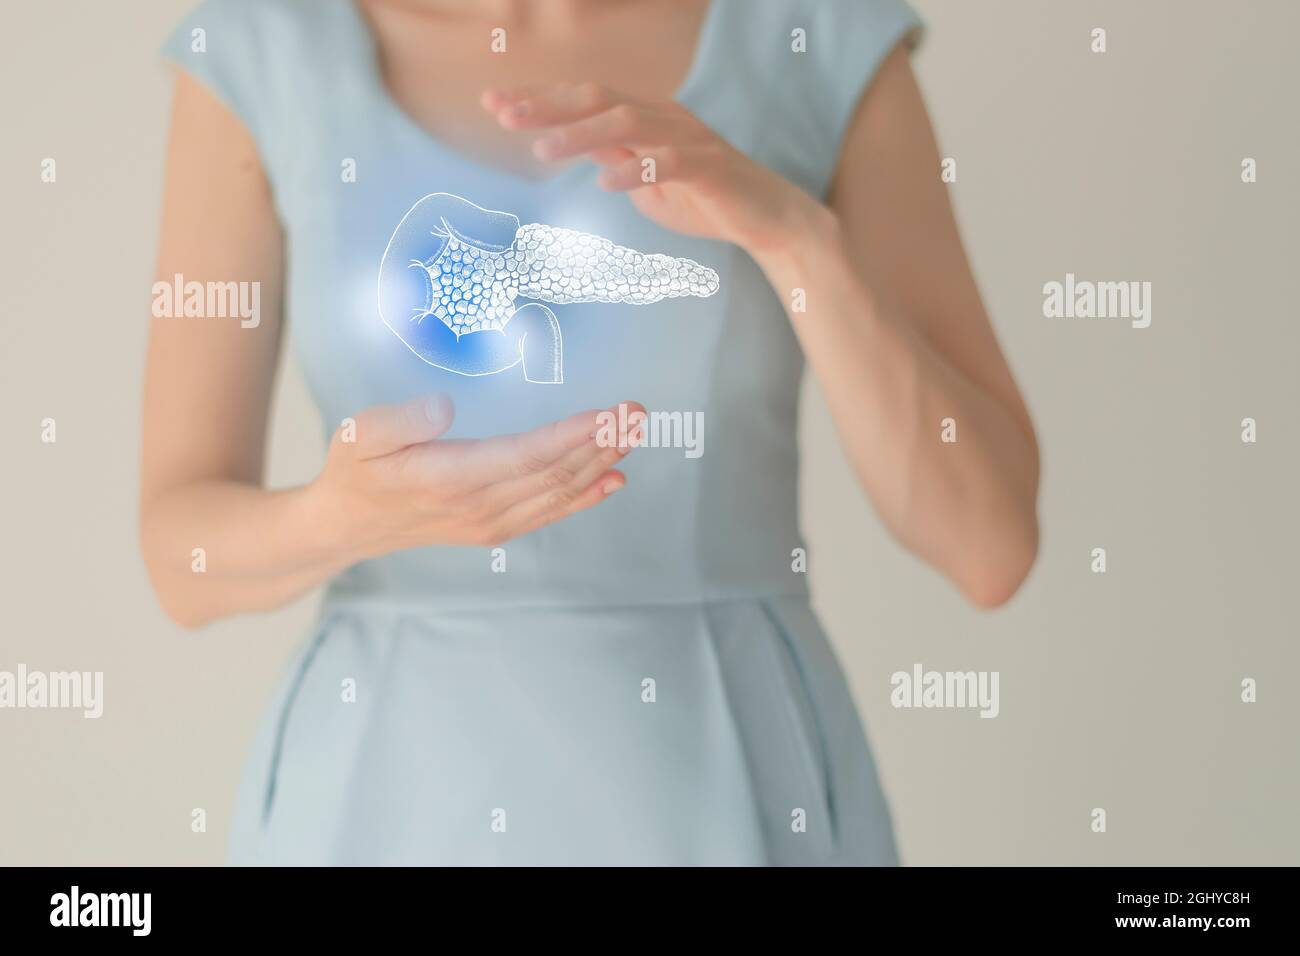 Unrecognizable female patient in blue clothes, highlighted handrawn pancreas. Human digestive system issues concept. Stock Photo